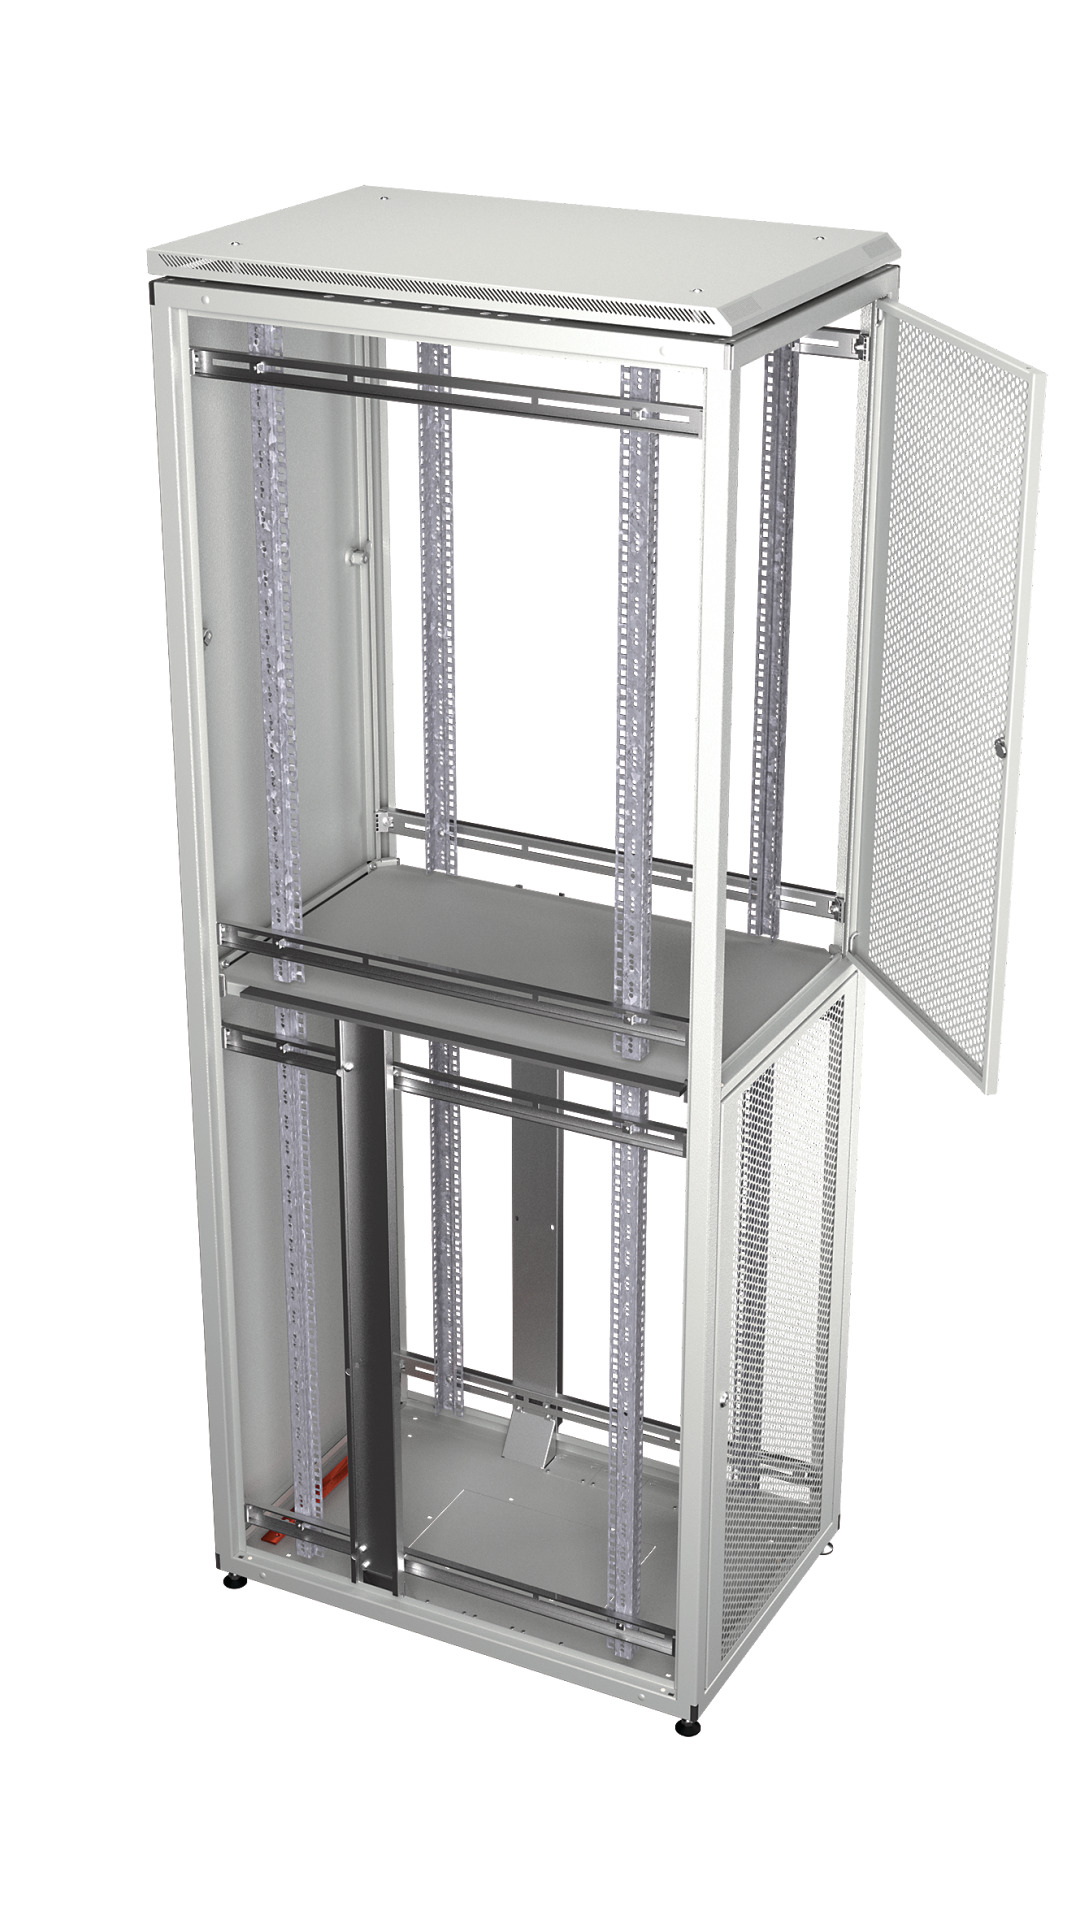 Co-Location Rack PRO, 1x23U+2x11U, 600x1000 mm, F+R 1-Part Perforated, RAL7035